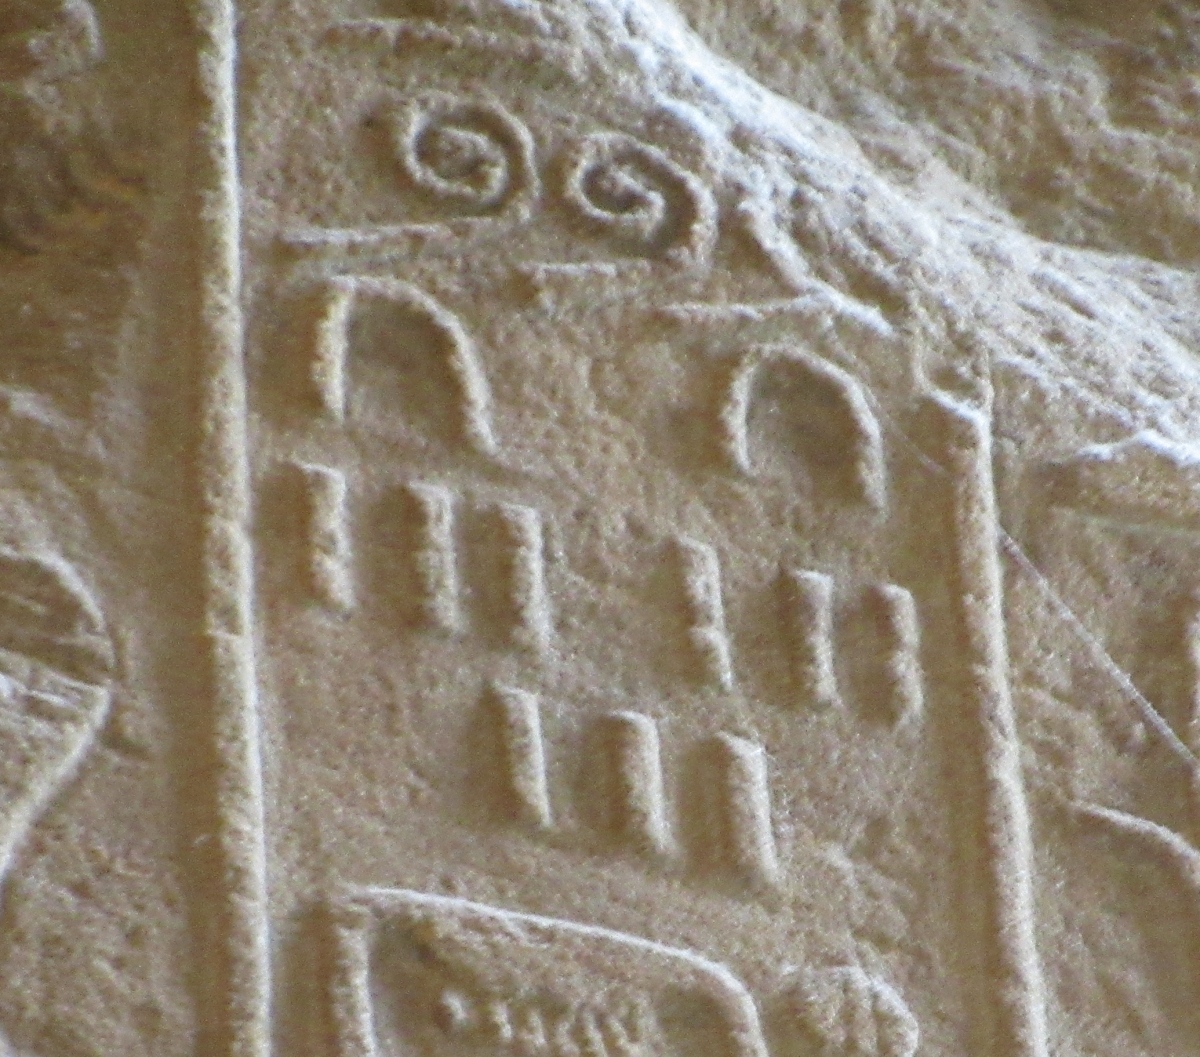 A third set of numeral hieroglyphs found on the Annals of Thutmose III.